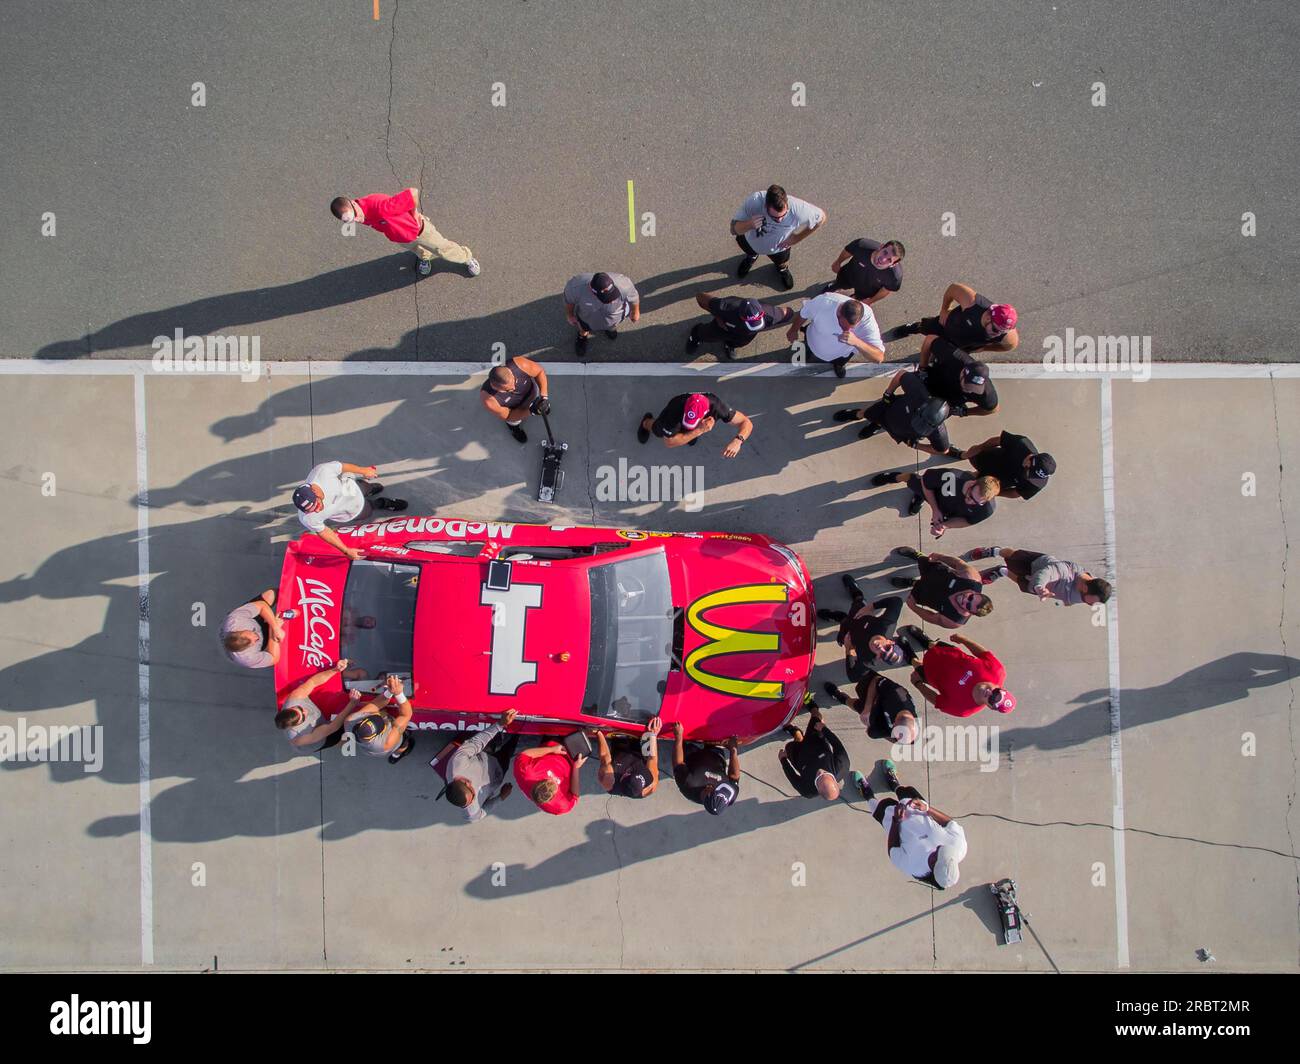 Concord, NC, Aug 04, 2015: The Chip Ganassi Racing teams practice their pit stops at Chip Ganassi Racing Headquarters in Concord, NC Stock Photo